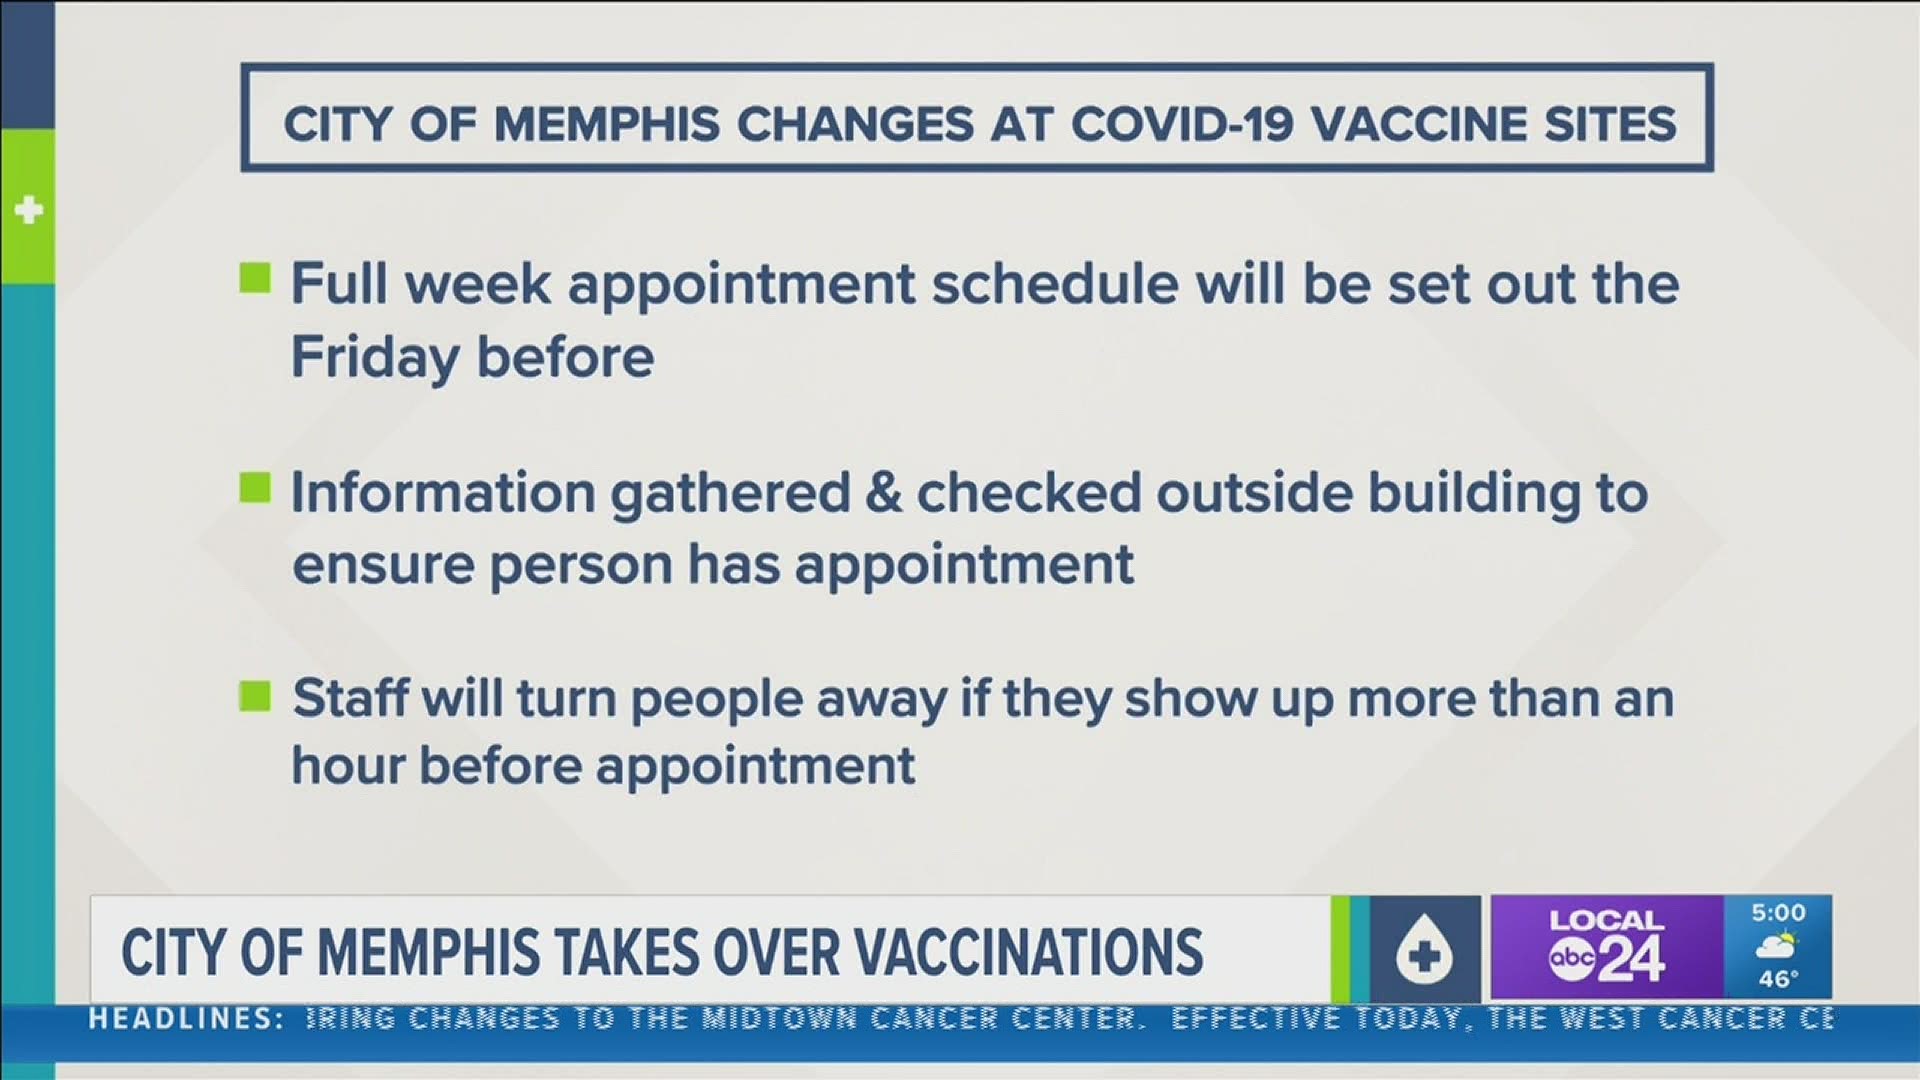 UTHSC and other health partners will take on an expanded role after the state stripped the Shelby County Health Department of local vaccine distribution & oversight.